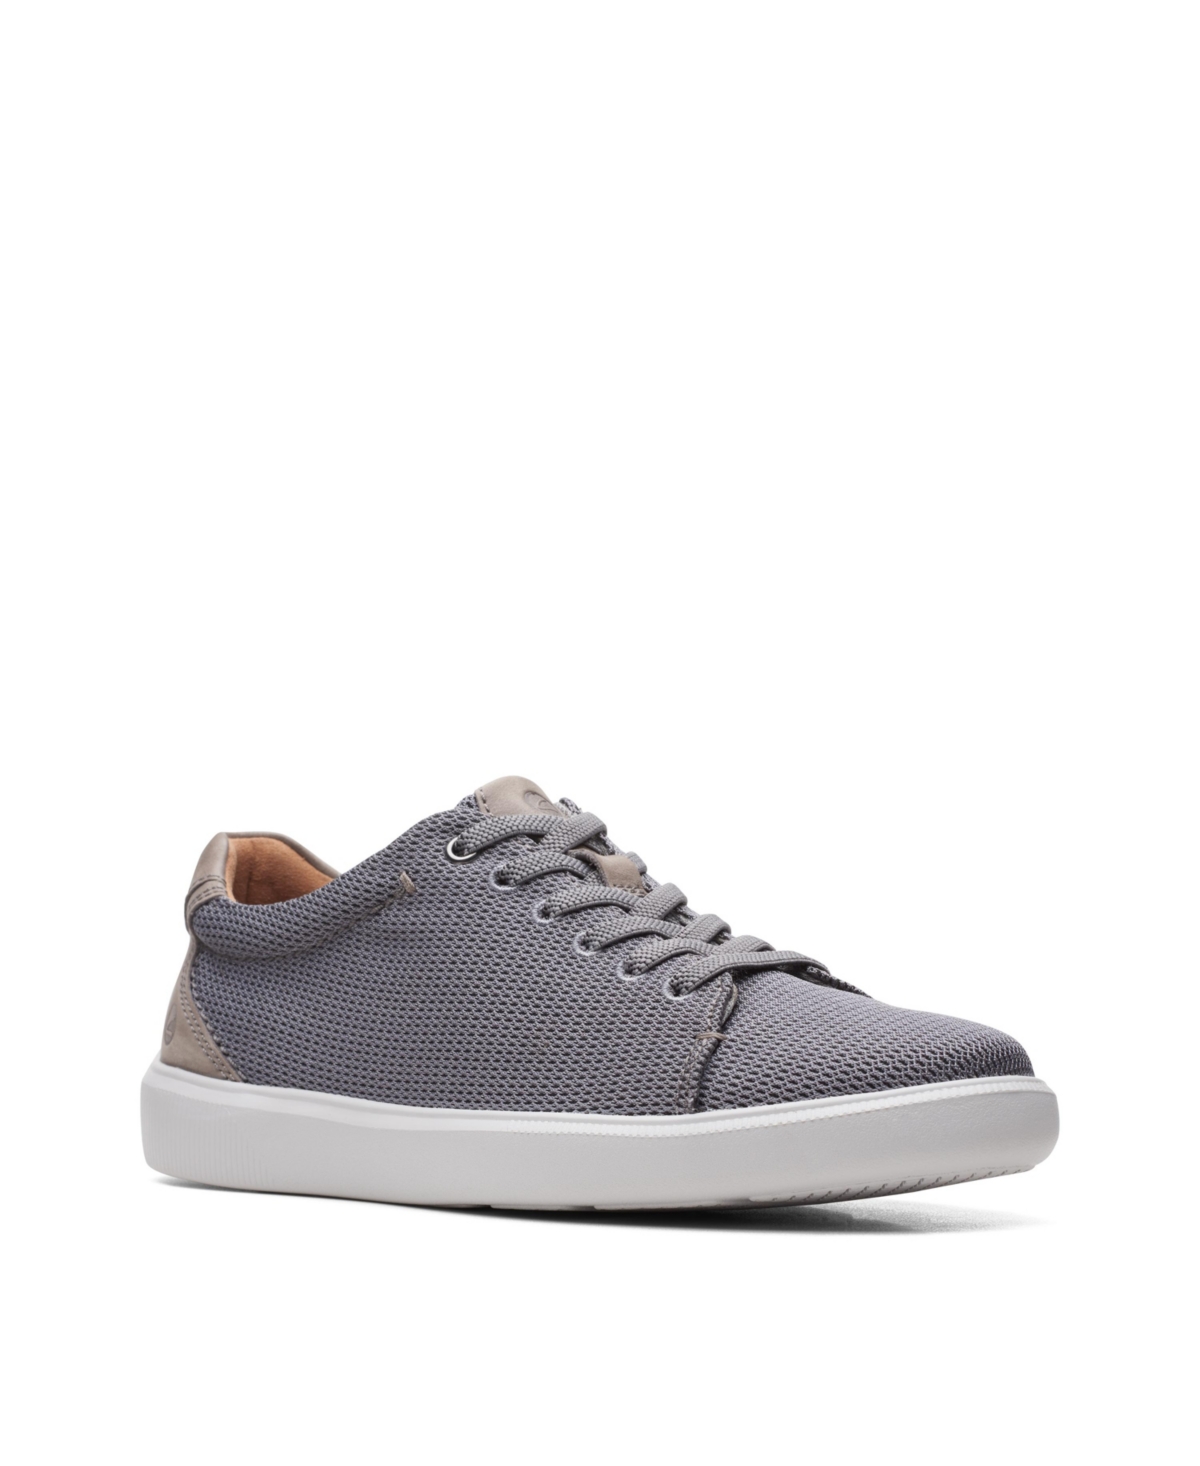 Men's Cambro Low Lace Up Sneakers - Gray Textile